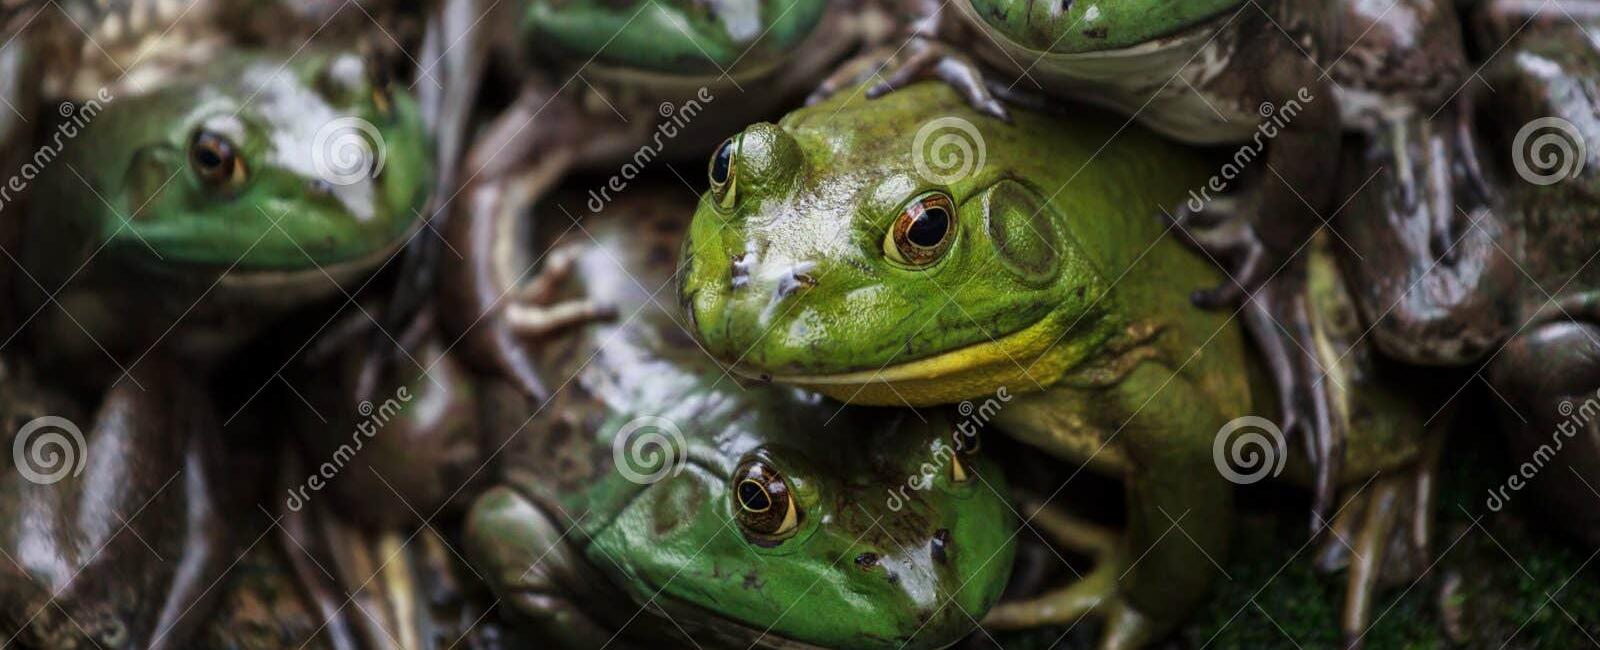 A group of frogs is called an army